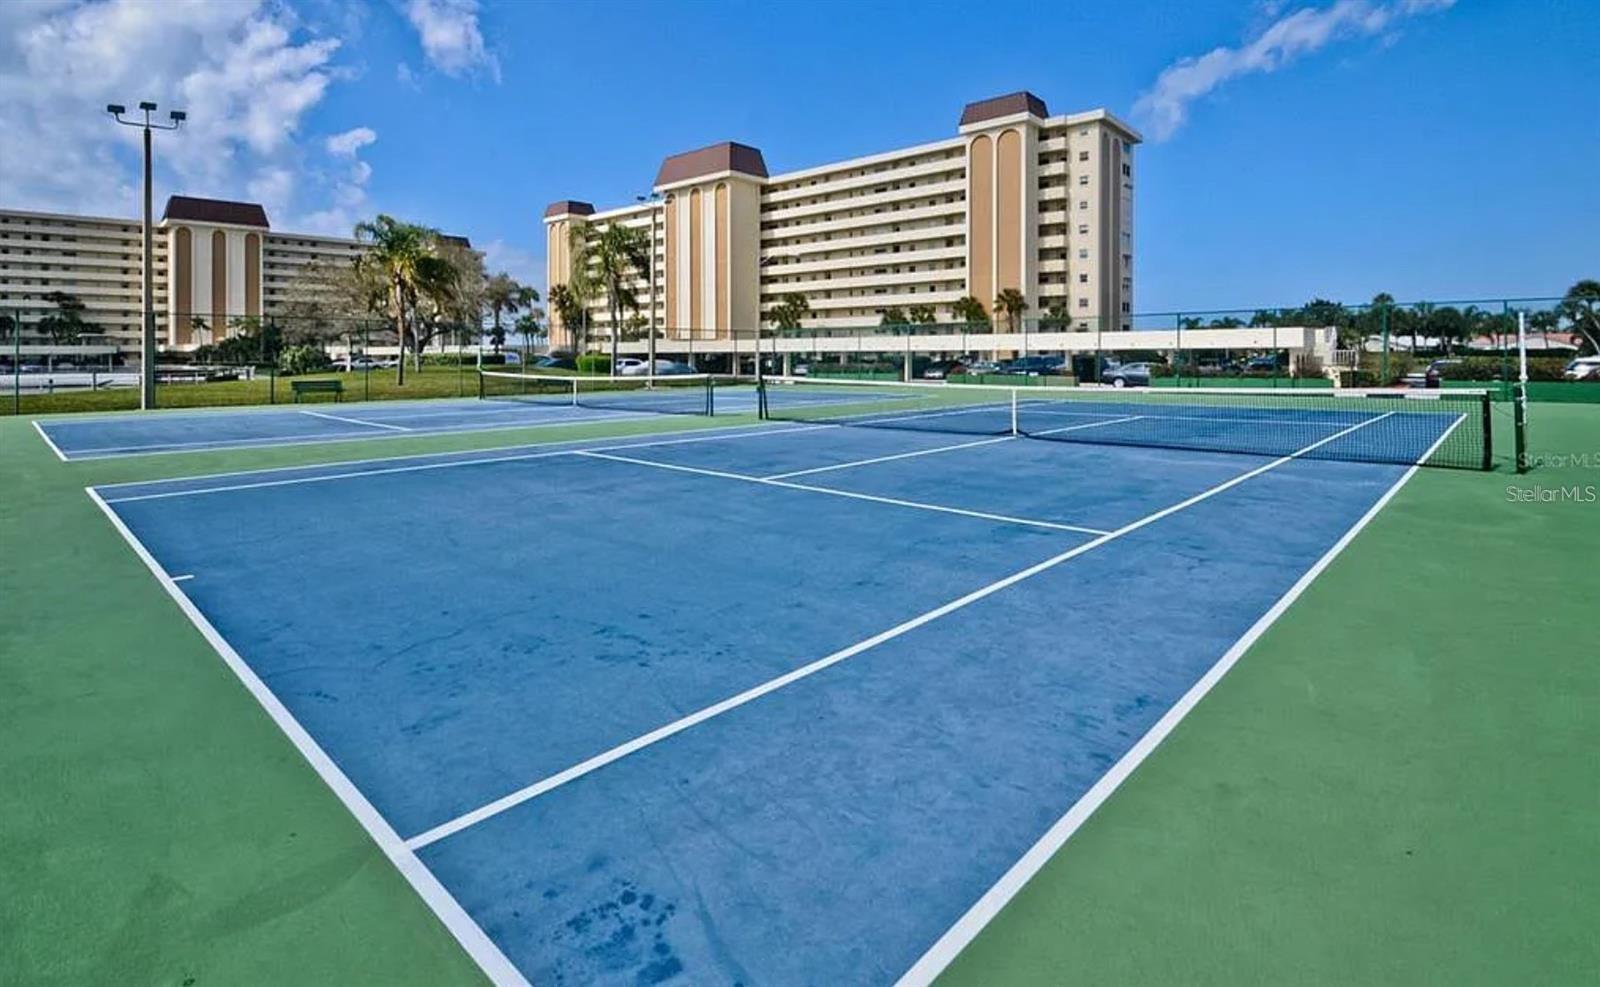 Tennis and PickleBall